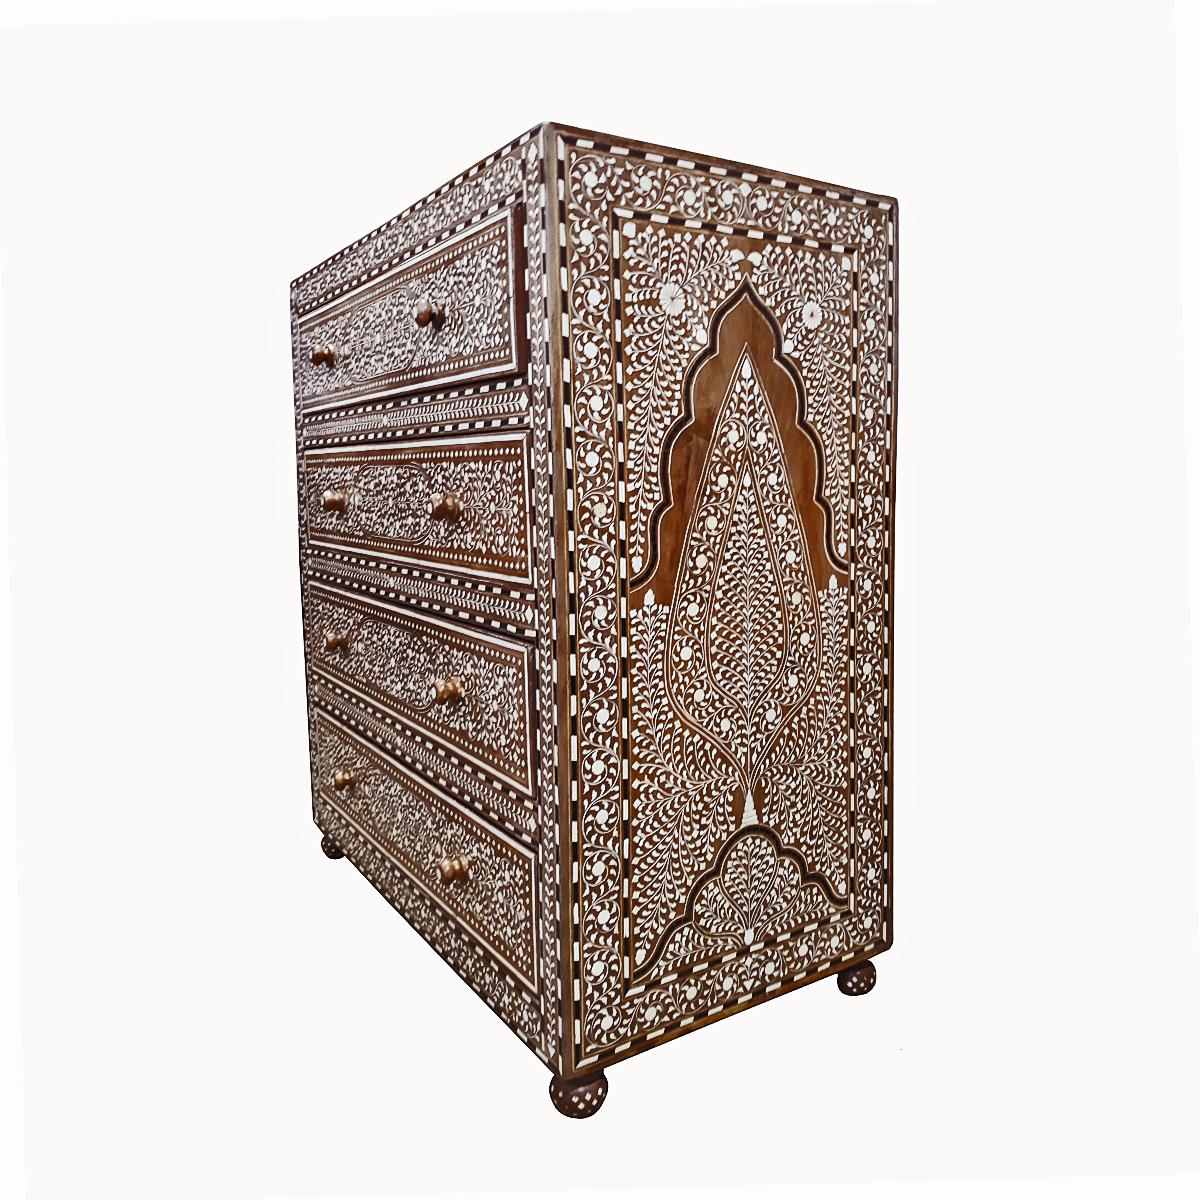 Anglo-Indian Bone-Inlaid Teak Chest of Drawers from India